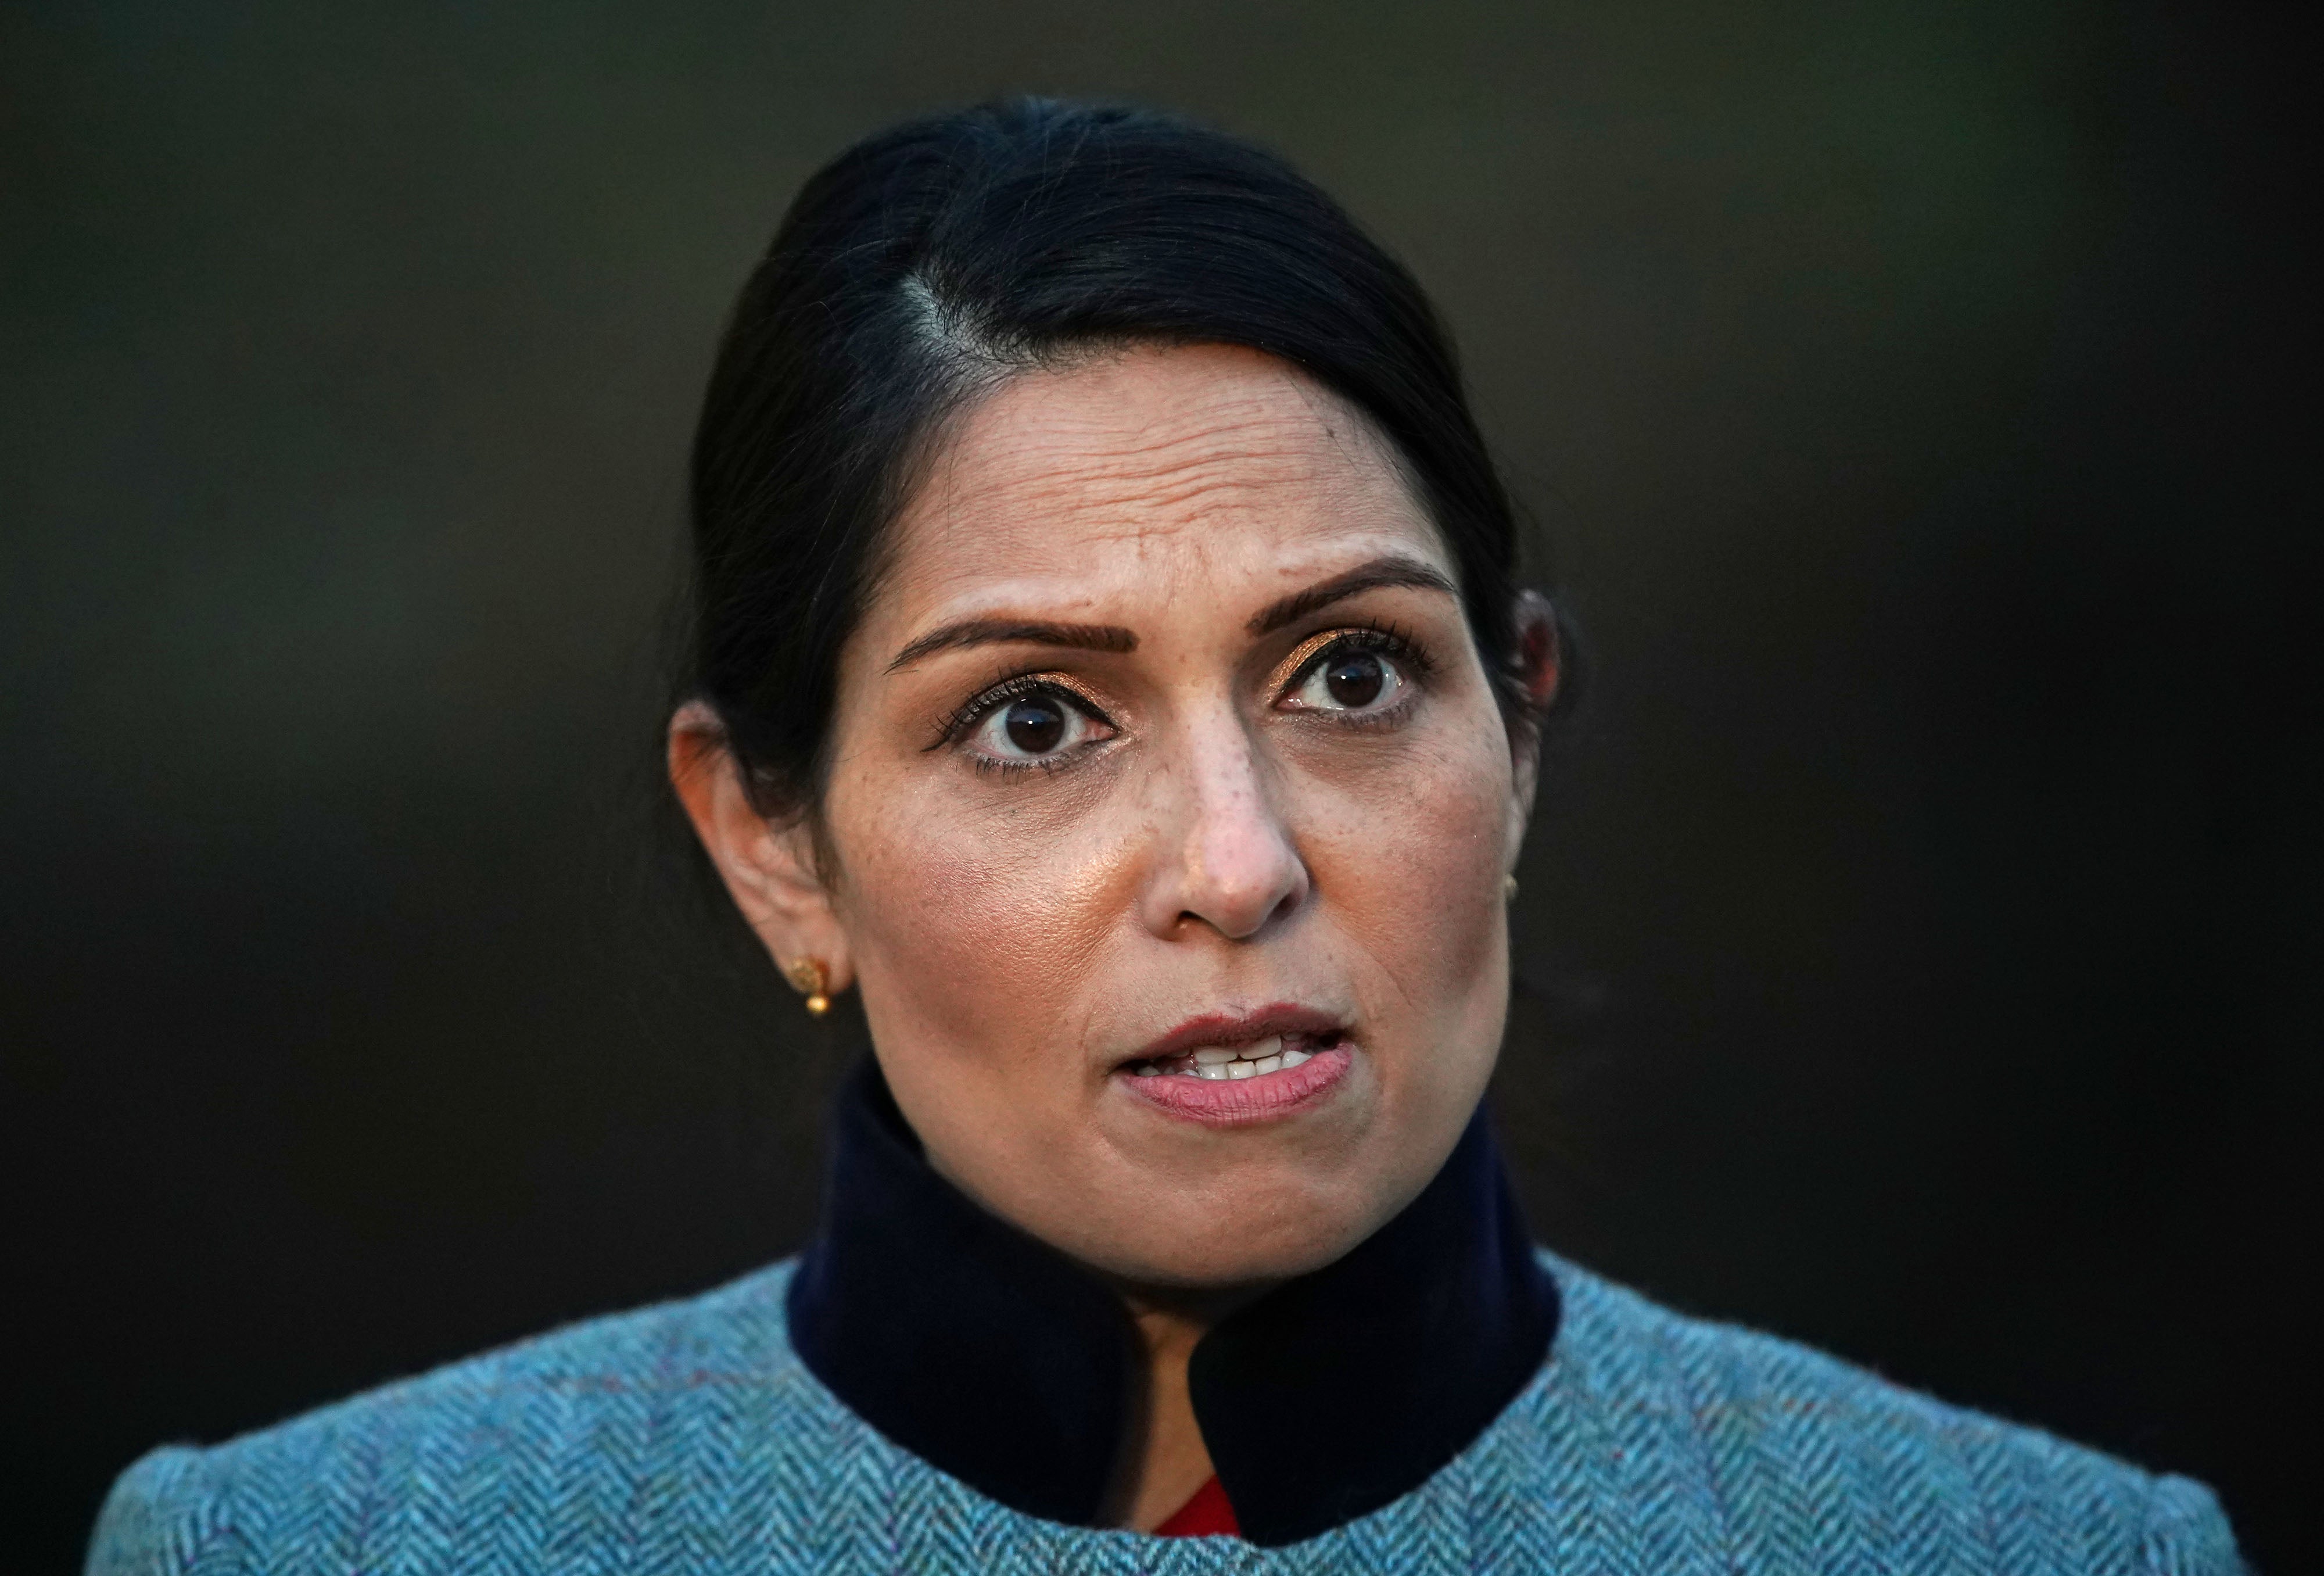 Home Secretary Priti Patel said the crime figures showed the Government’s approach ‘is working’ (Aaron Chown/PA)